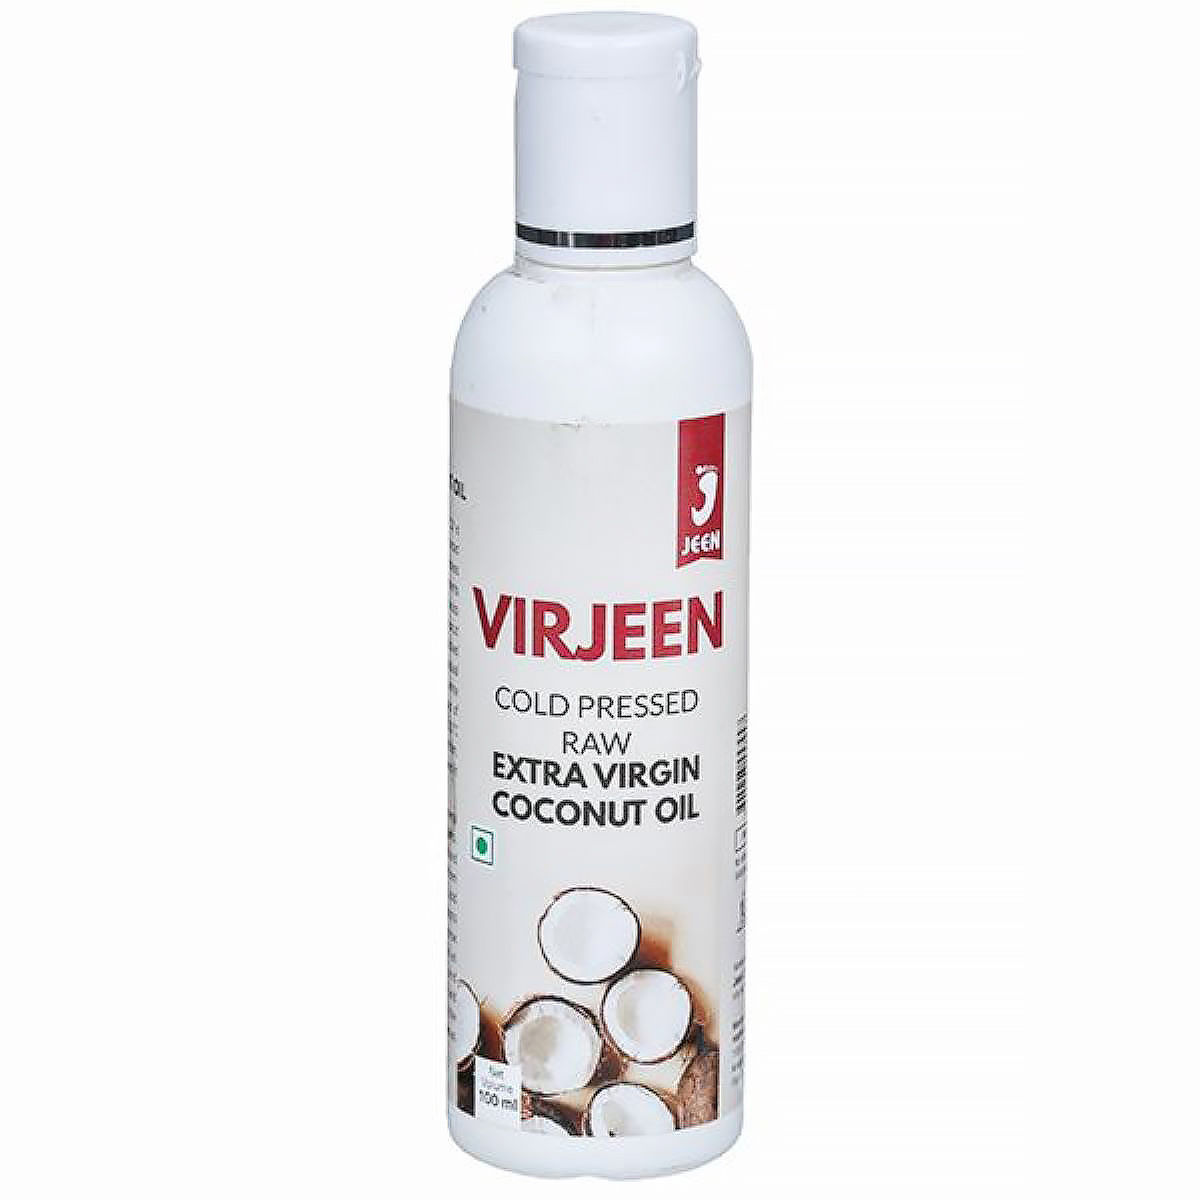 Virjeen Cold Pressed Raw Coconut Oil, 100 ml Price, Uses, Side Effects,  Composition - Apollo Pharmacy